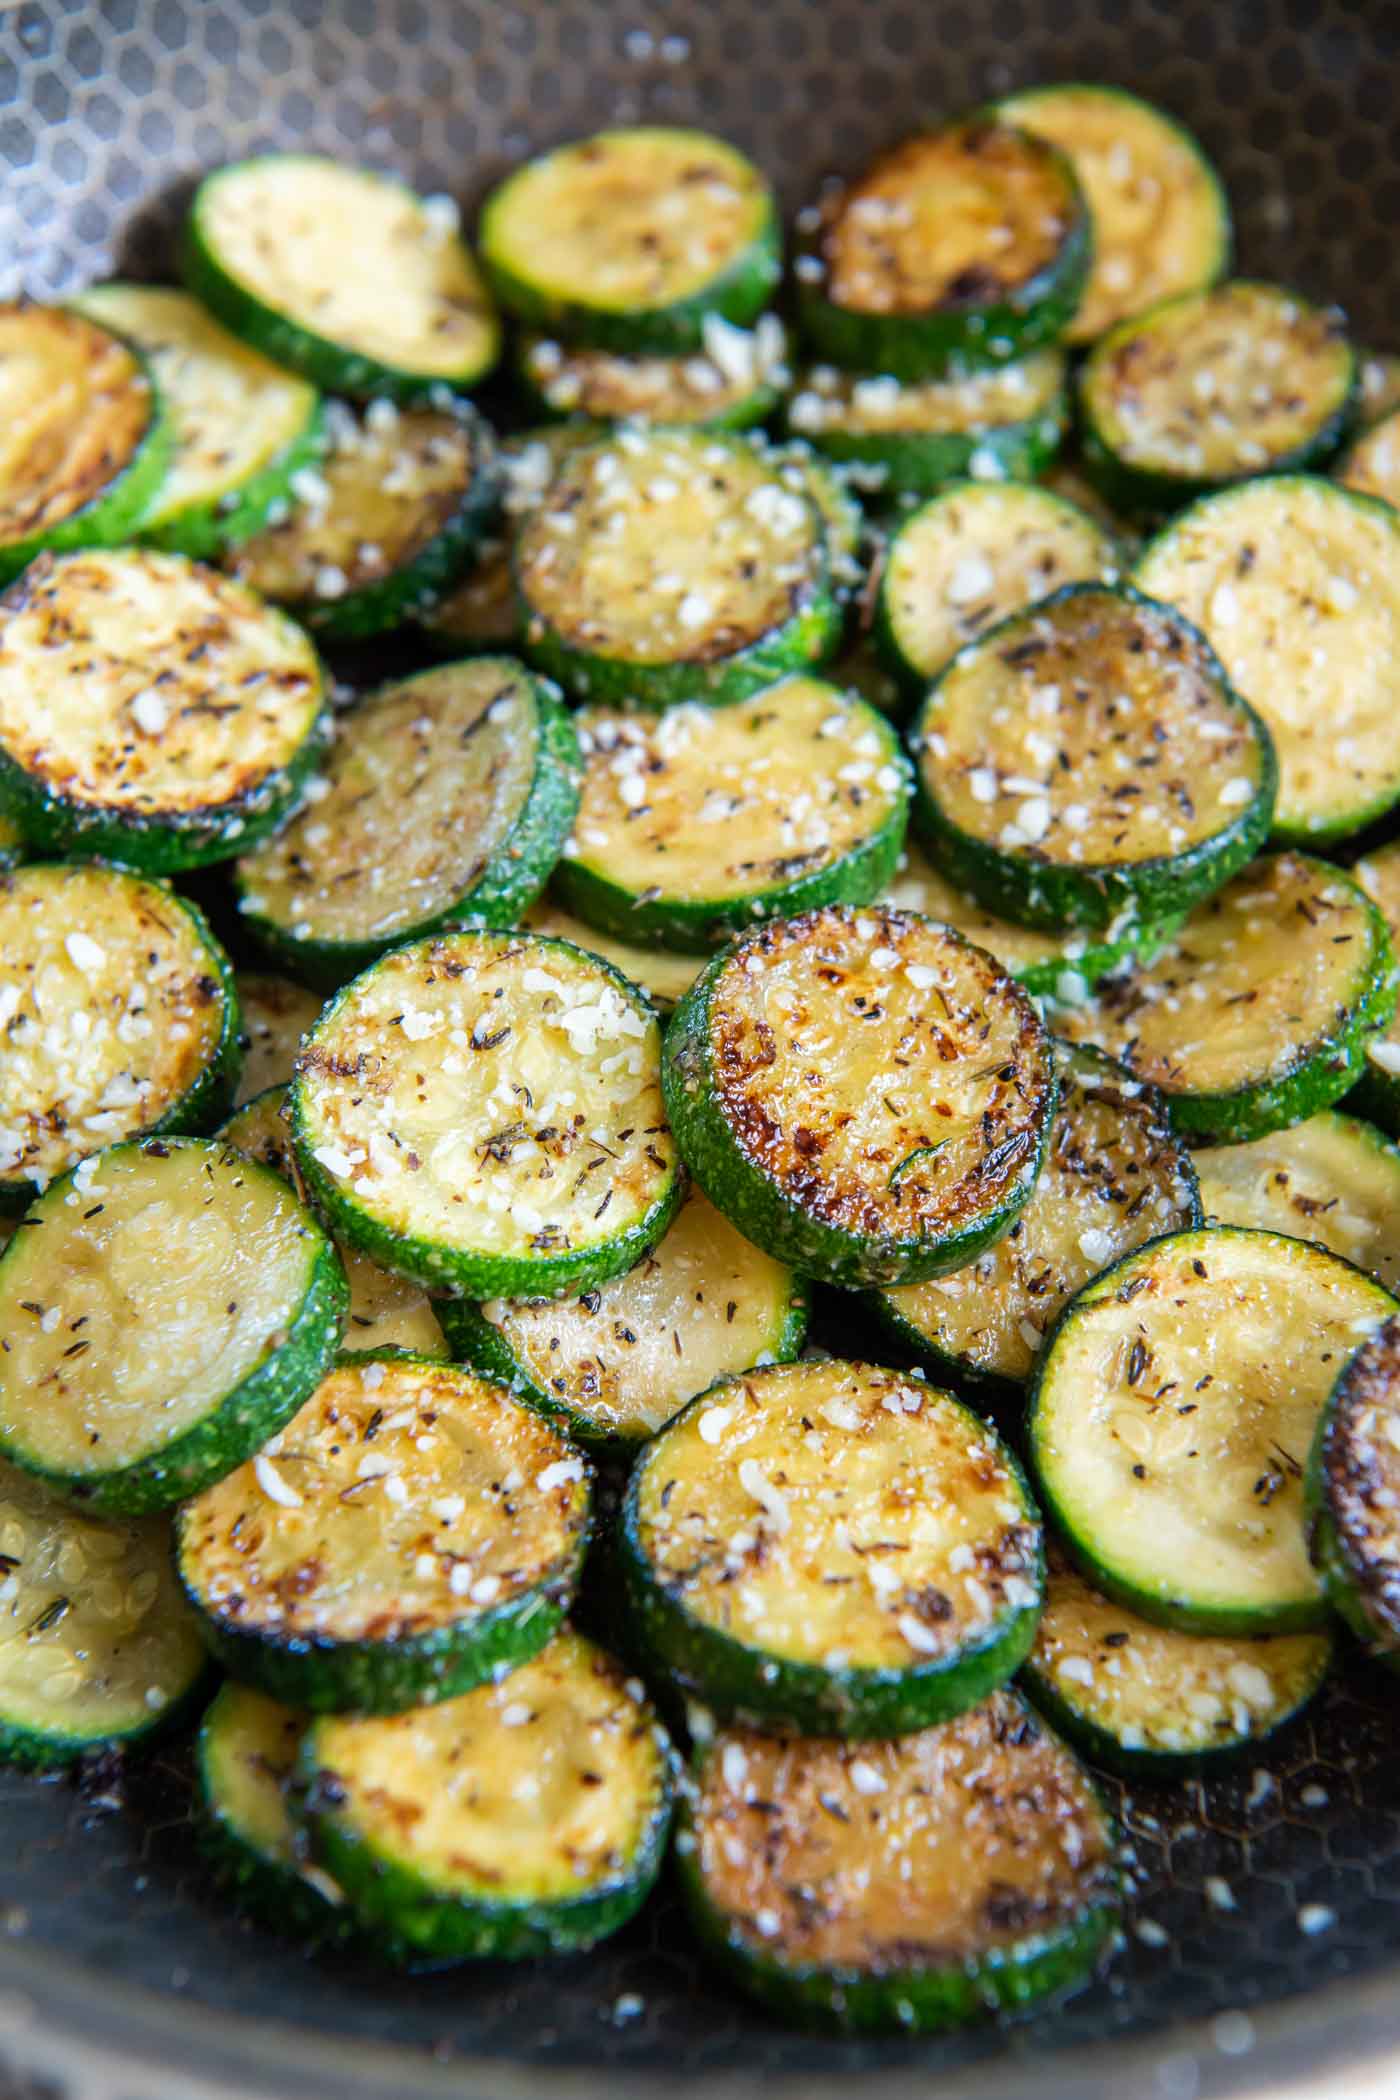 Sauteed zucchini with seasonings and parmesan in skillet.